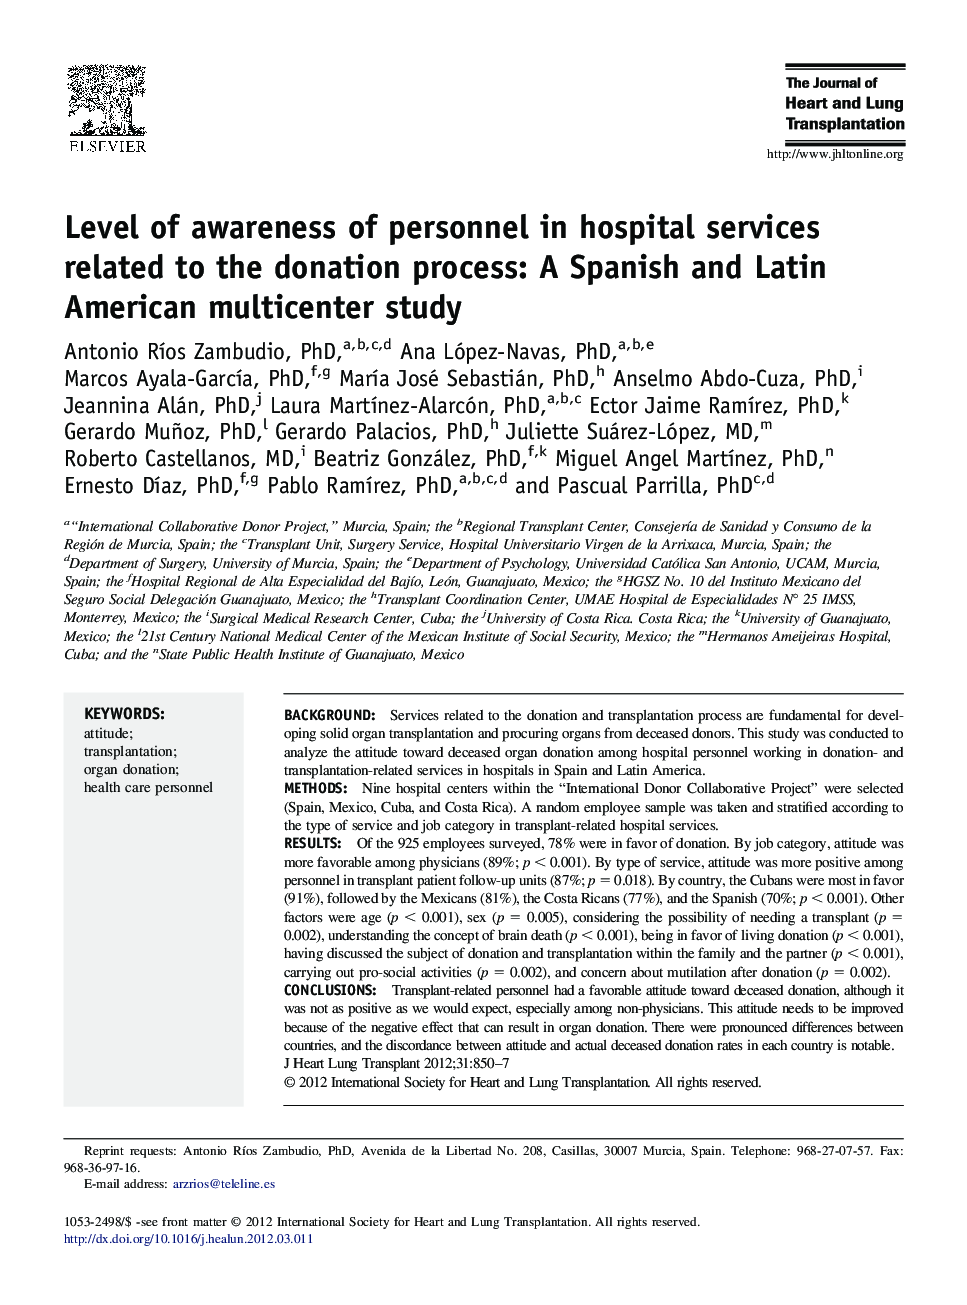 Level of awareness of personnel in hospital services related to the donation process: A Spanish and Latin American multicenter study